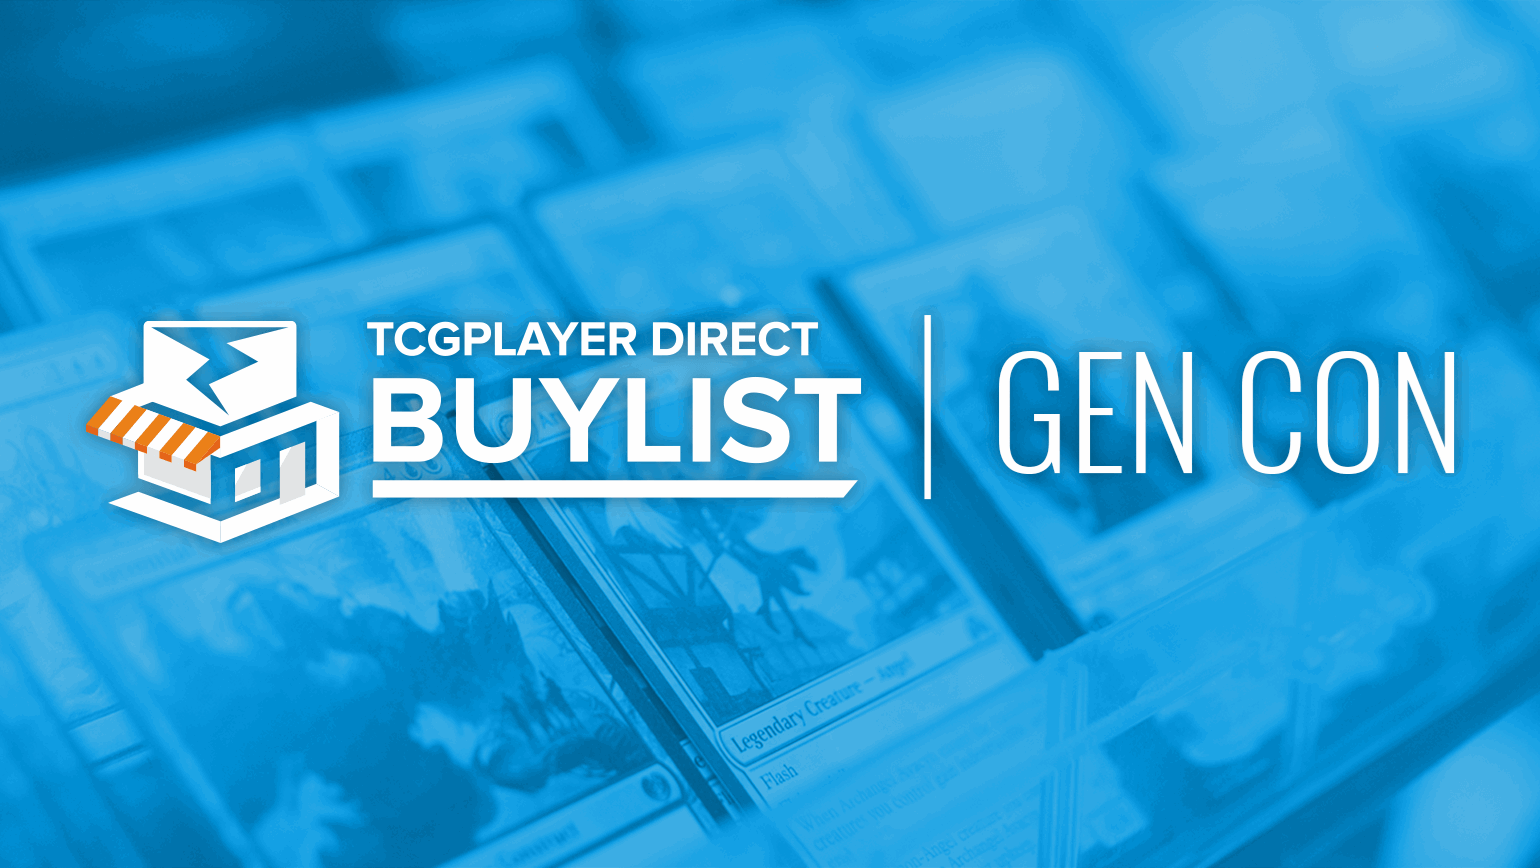 We’re Bringing Your Buylist Back to Gen Con